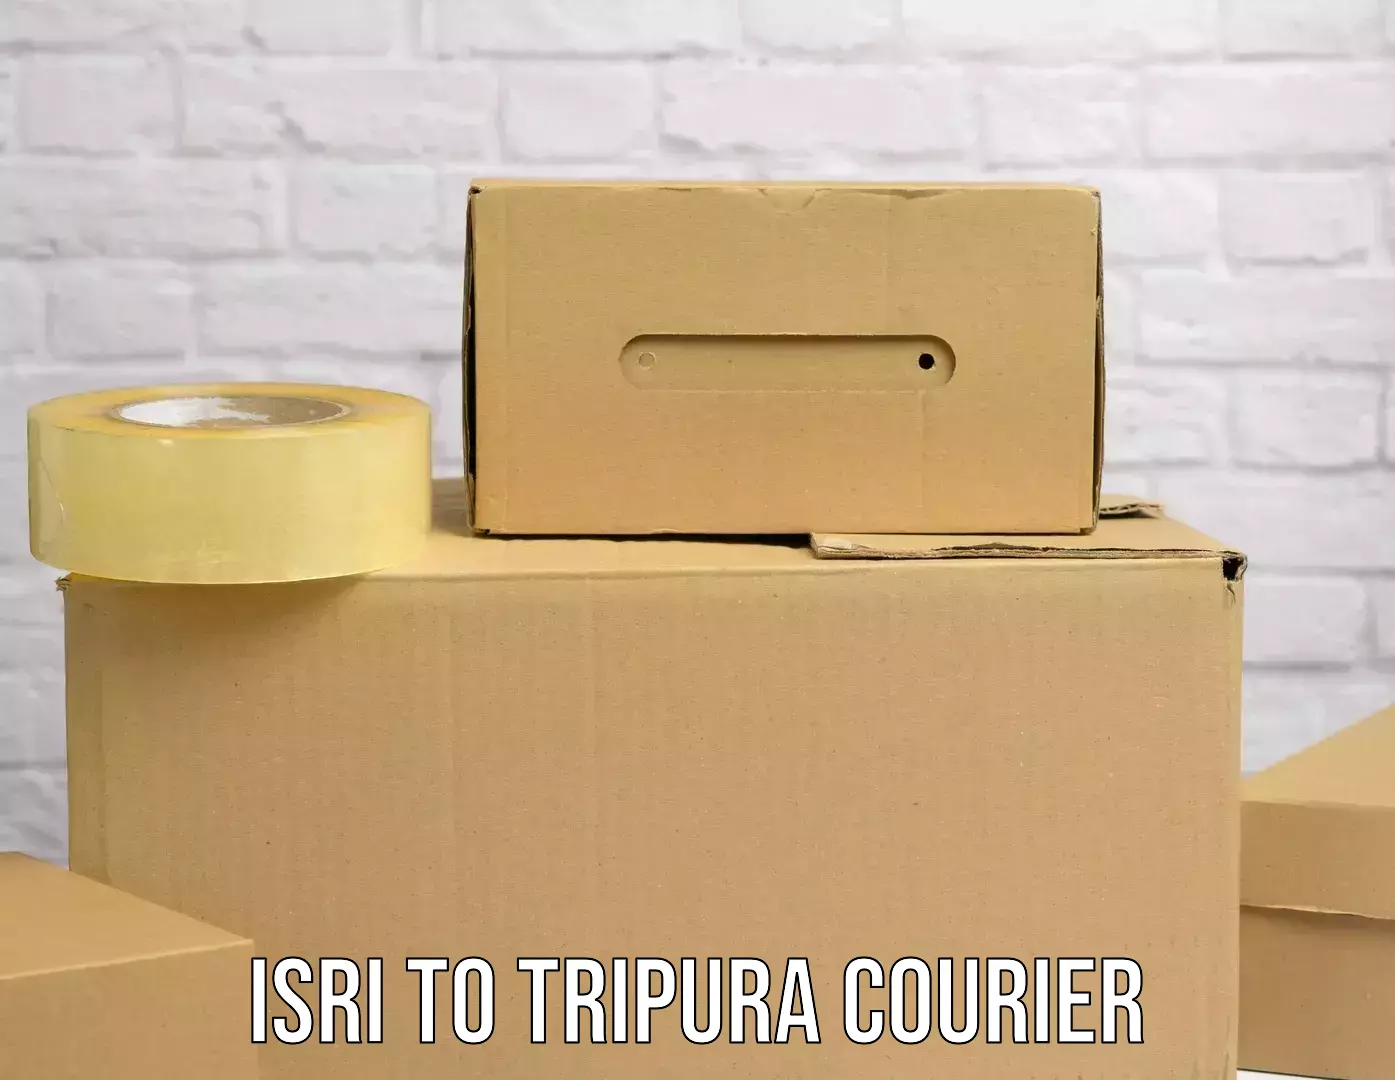 Reliable parcel services Isri to Agartala